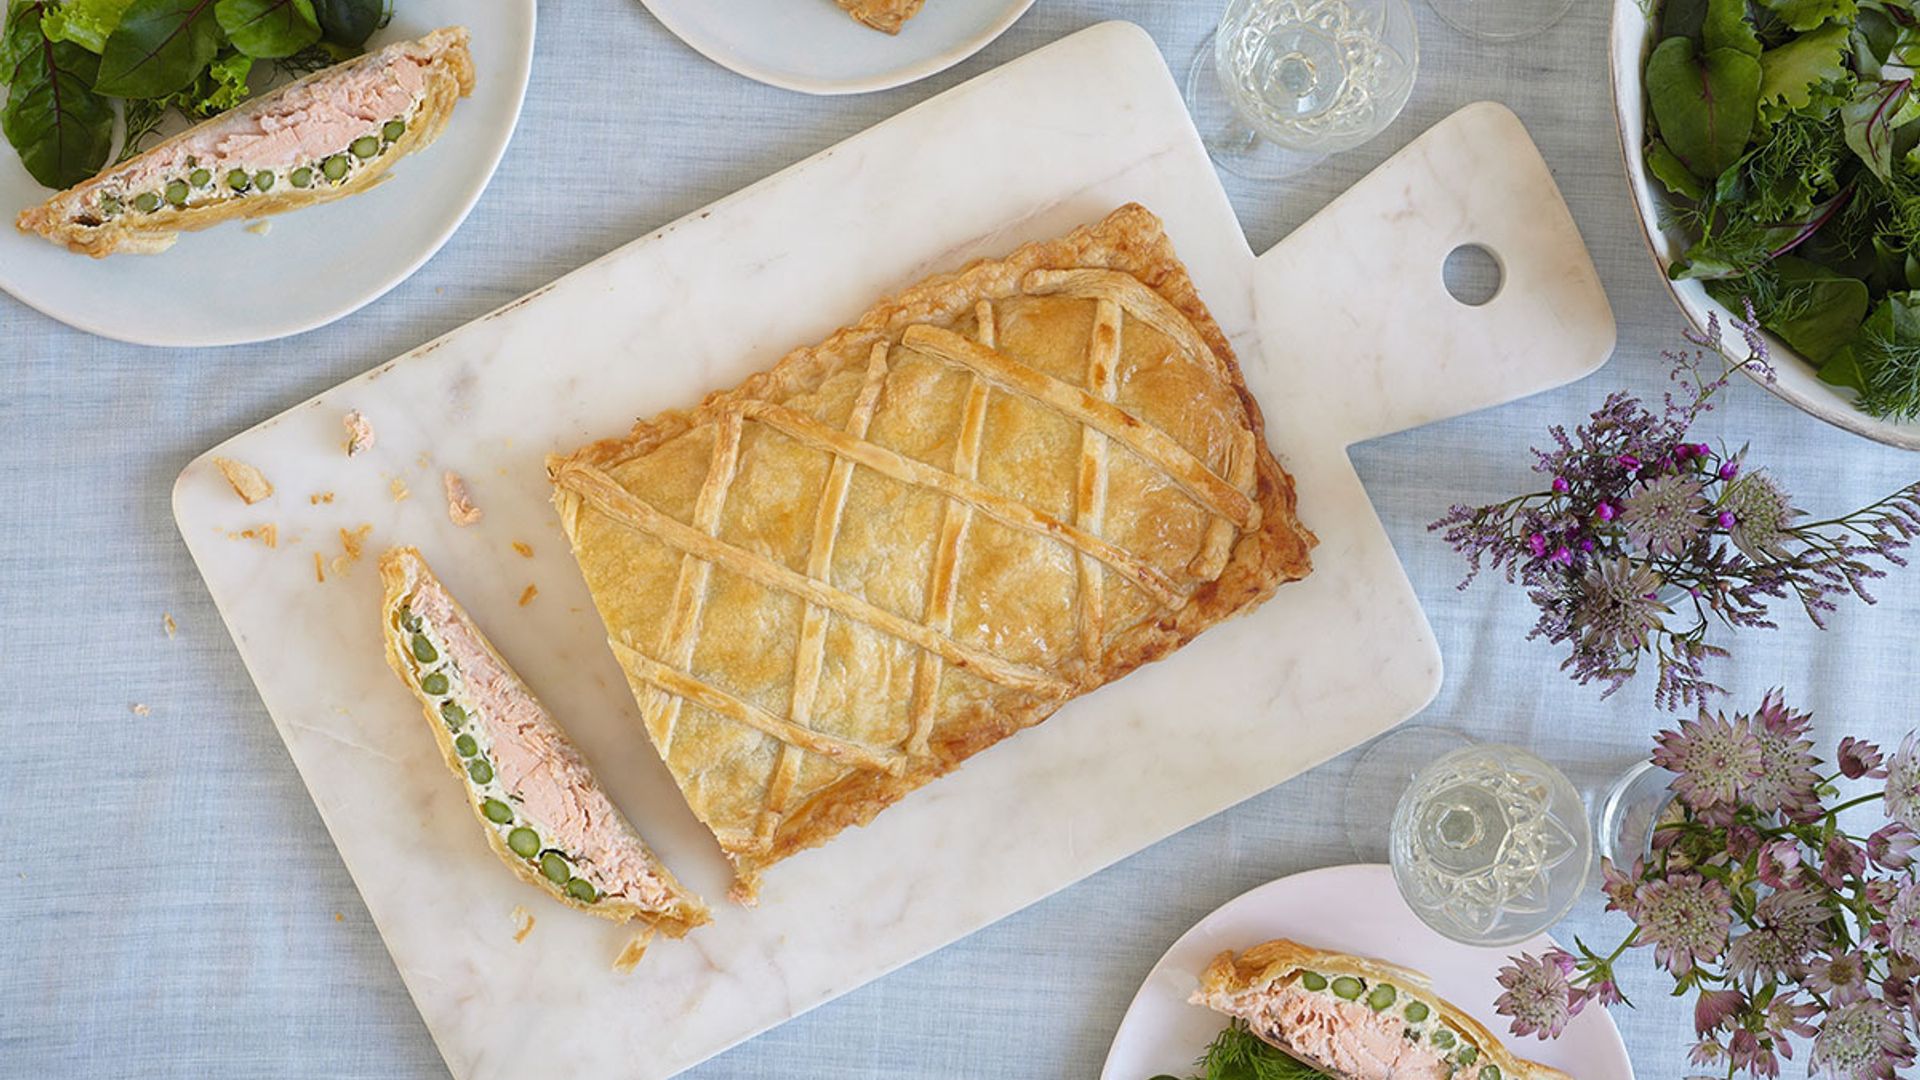 Mary Berry's salmon en croûte recipe with asparagus is the perfect Christmas party dish